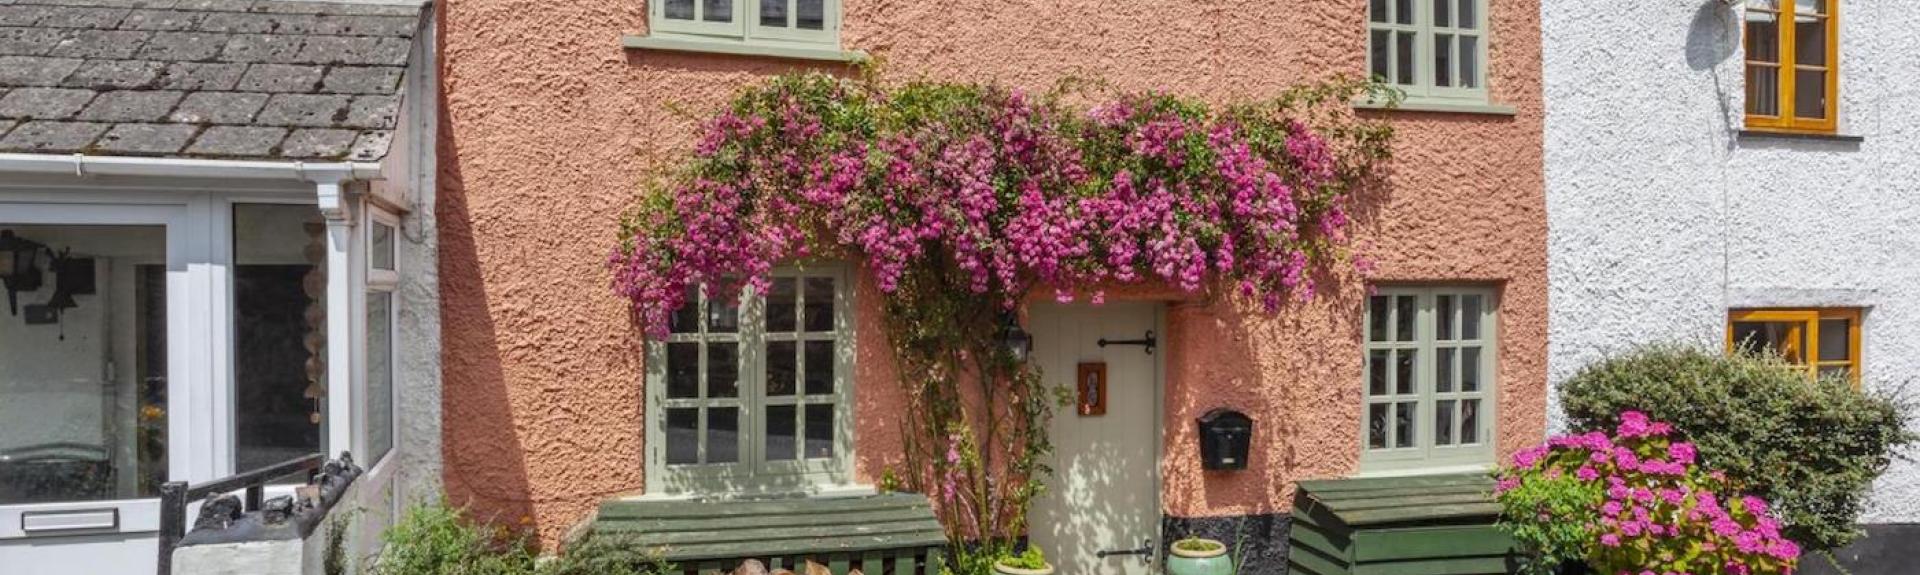 Double-fronted exterior of a rustic, terraced holiday cottage in a Mid Devon village street with a flowery-creeper overhanging the front door.